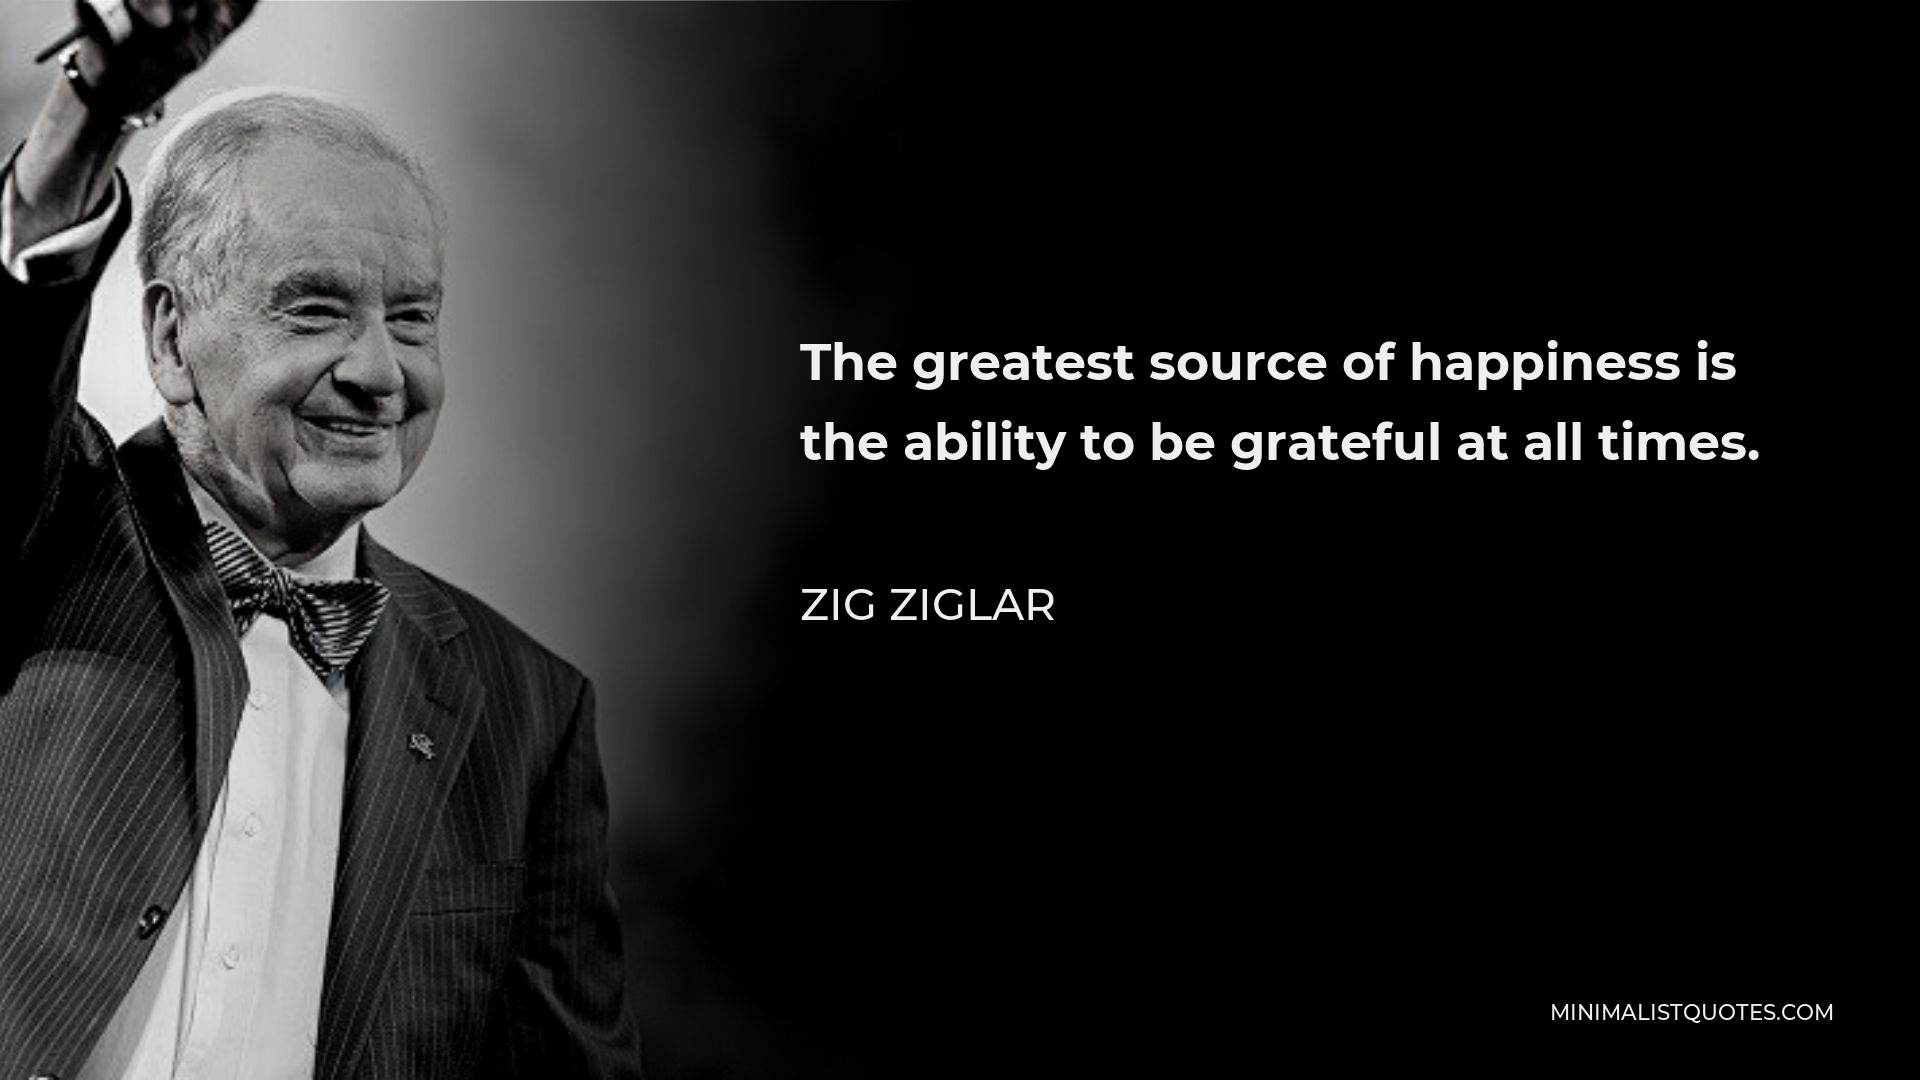 Zig Ziglar Quote - The greatest source of happiness is the ability to be grateful at all times.